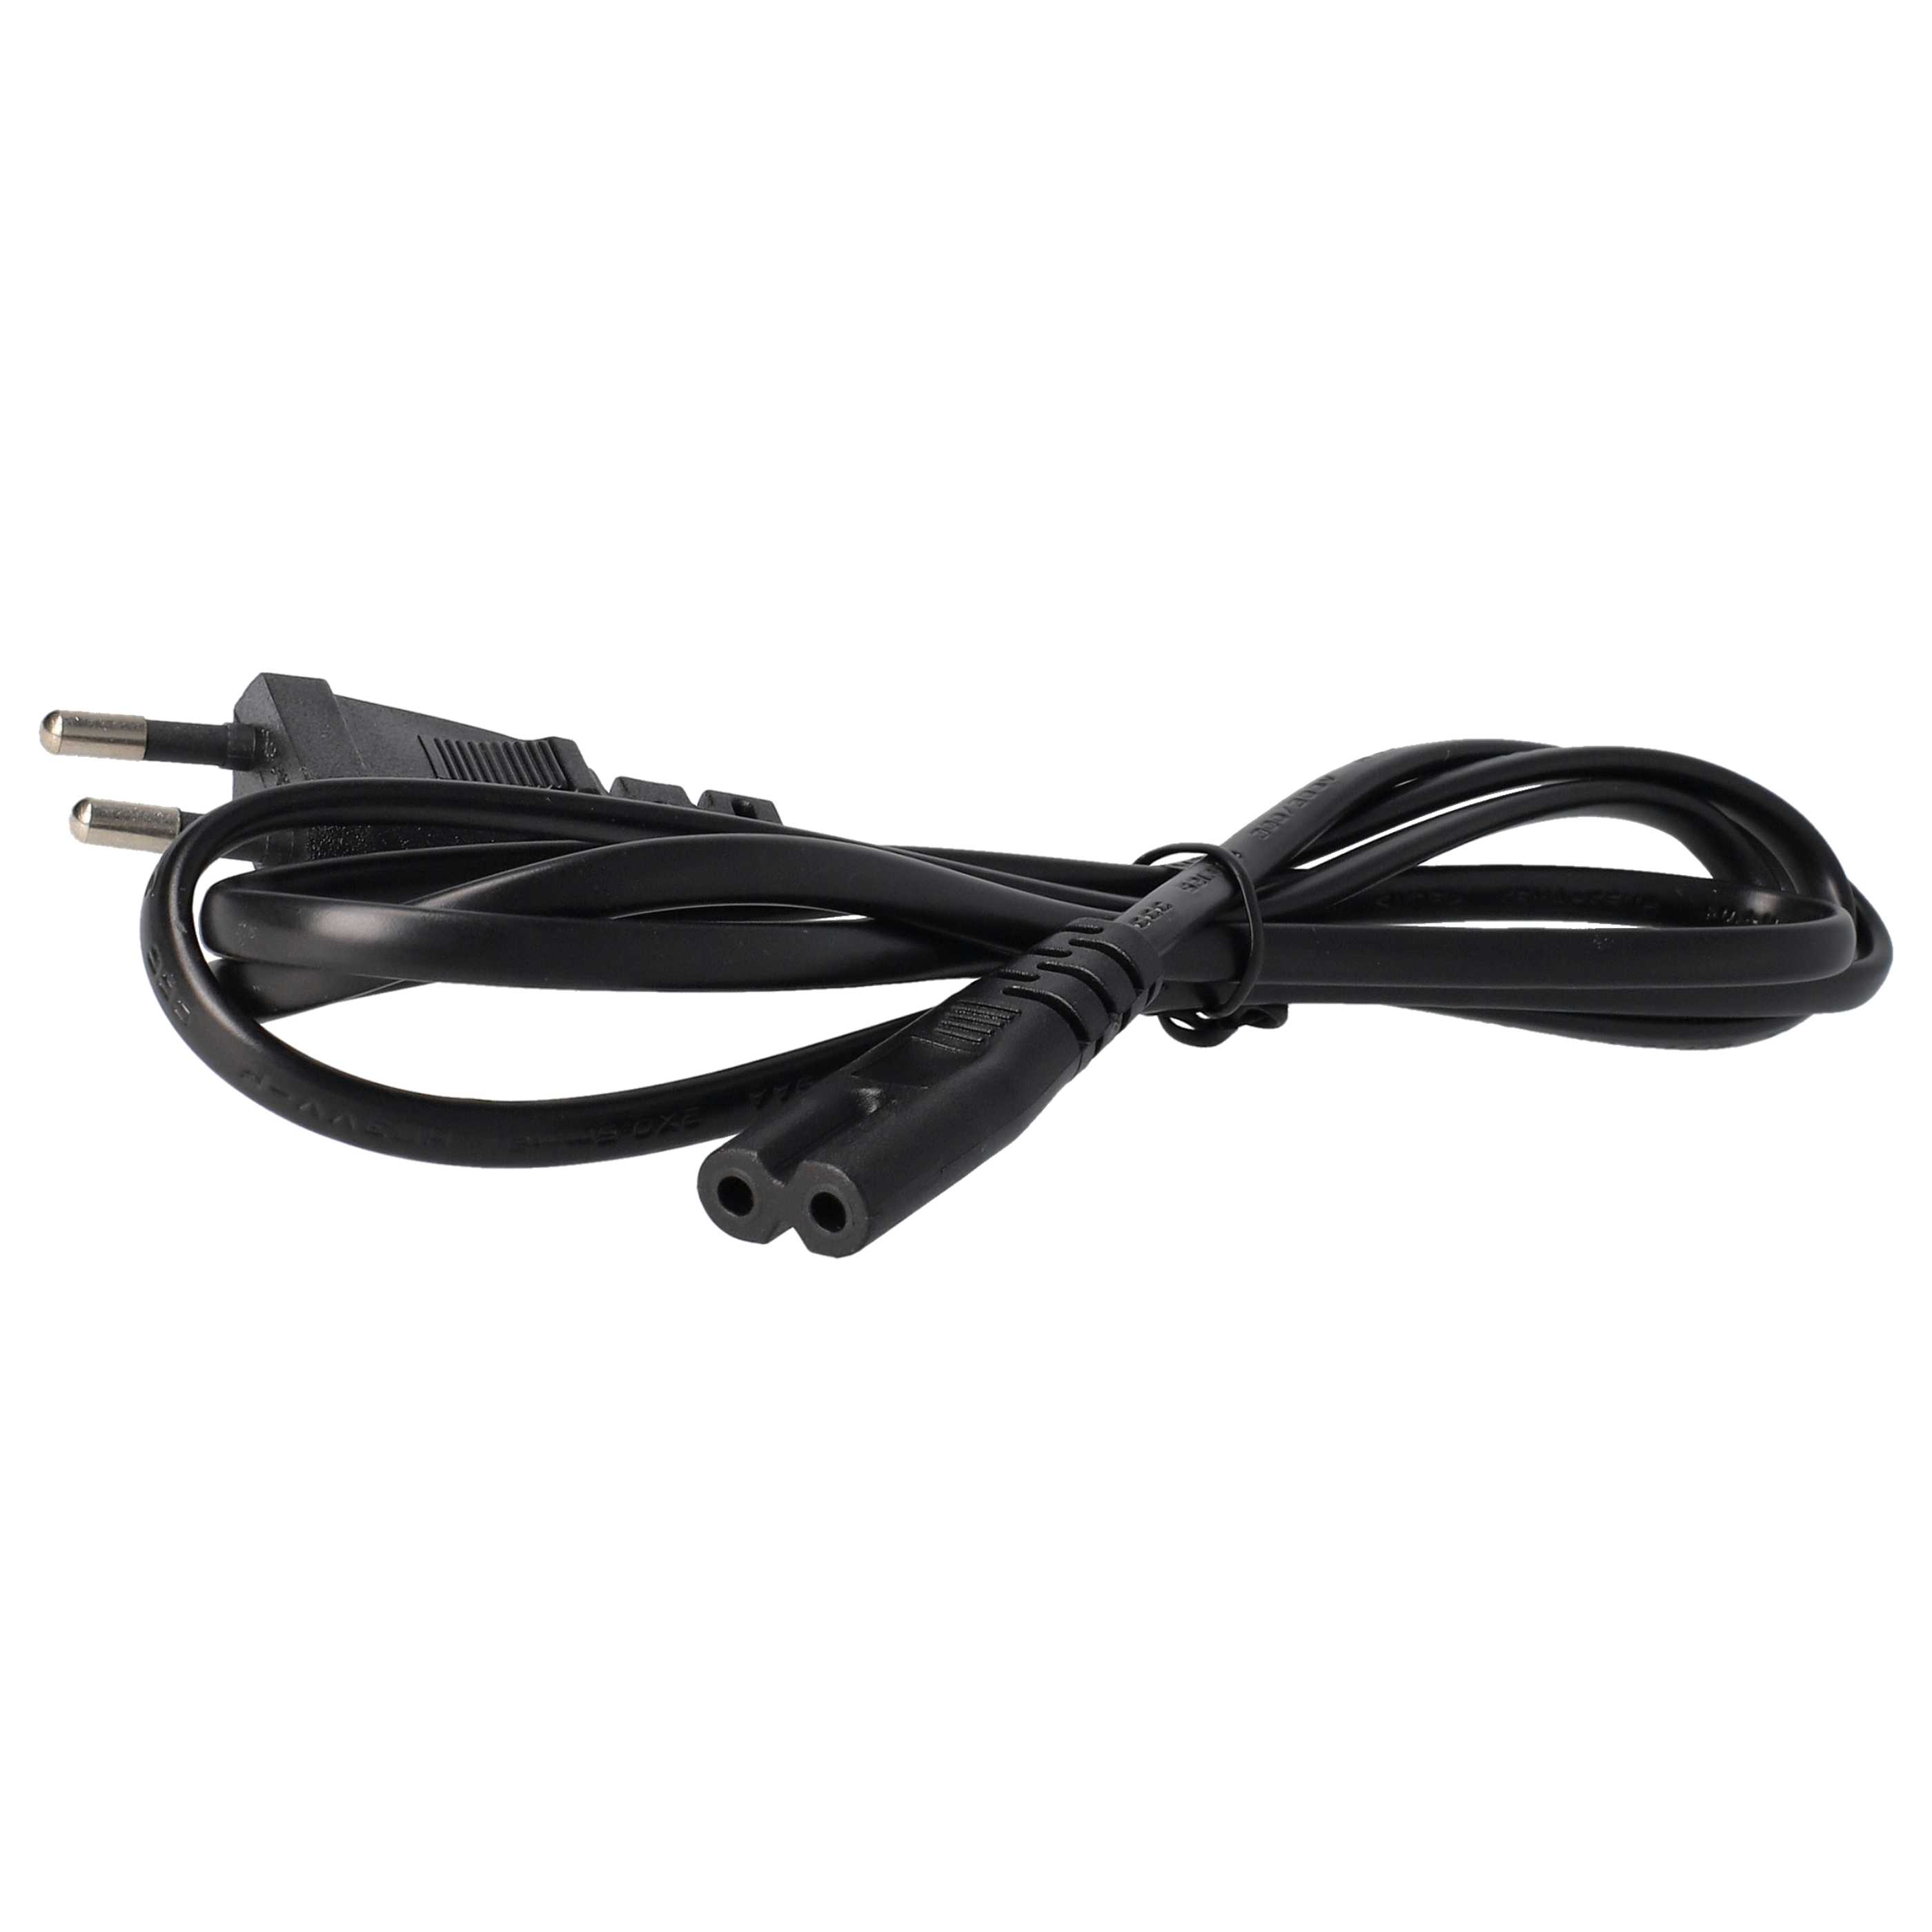 Mains Power Adapter replaces Lenovo 41N8460, 40Y7700, 92P1104, 40Y7696 for IBM LenovoNotebook etc., 90 W